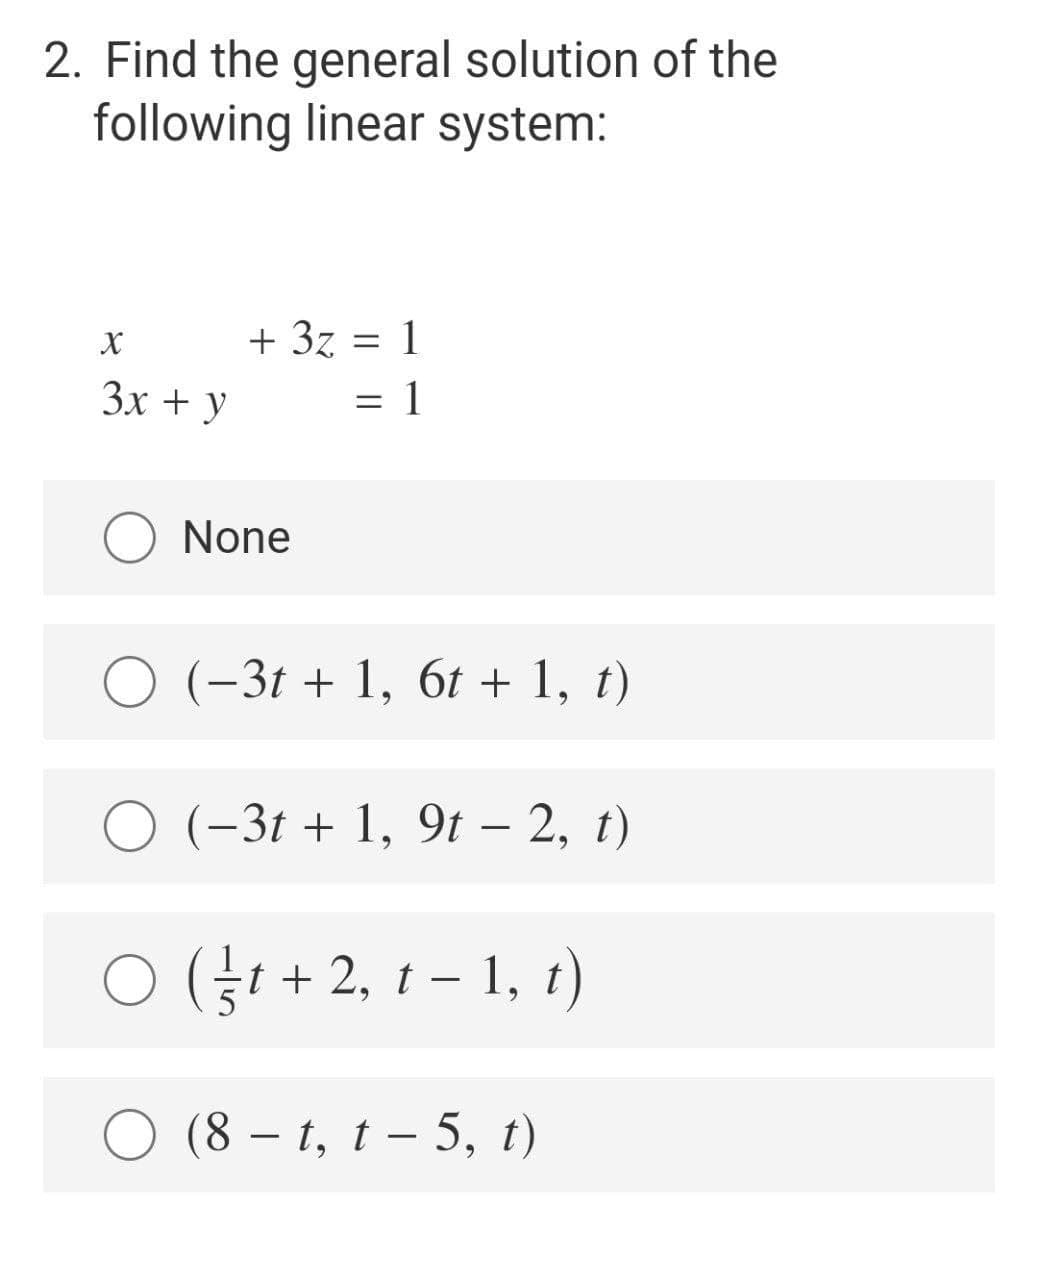 2. Find the general solution of the
following linear system:
X
+ 3z = 1
3x + y
= 1
None
O (-3t + 1, 6t + 1, t)
O (-3t + 1, 9t – 2, t)
O (i + 2, 1 – 1, t)
|
6.
(8 – 1, t – 5, t)
